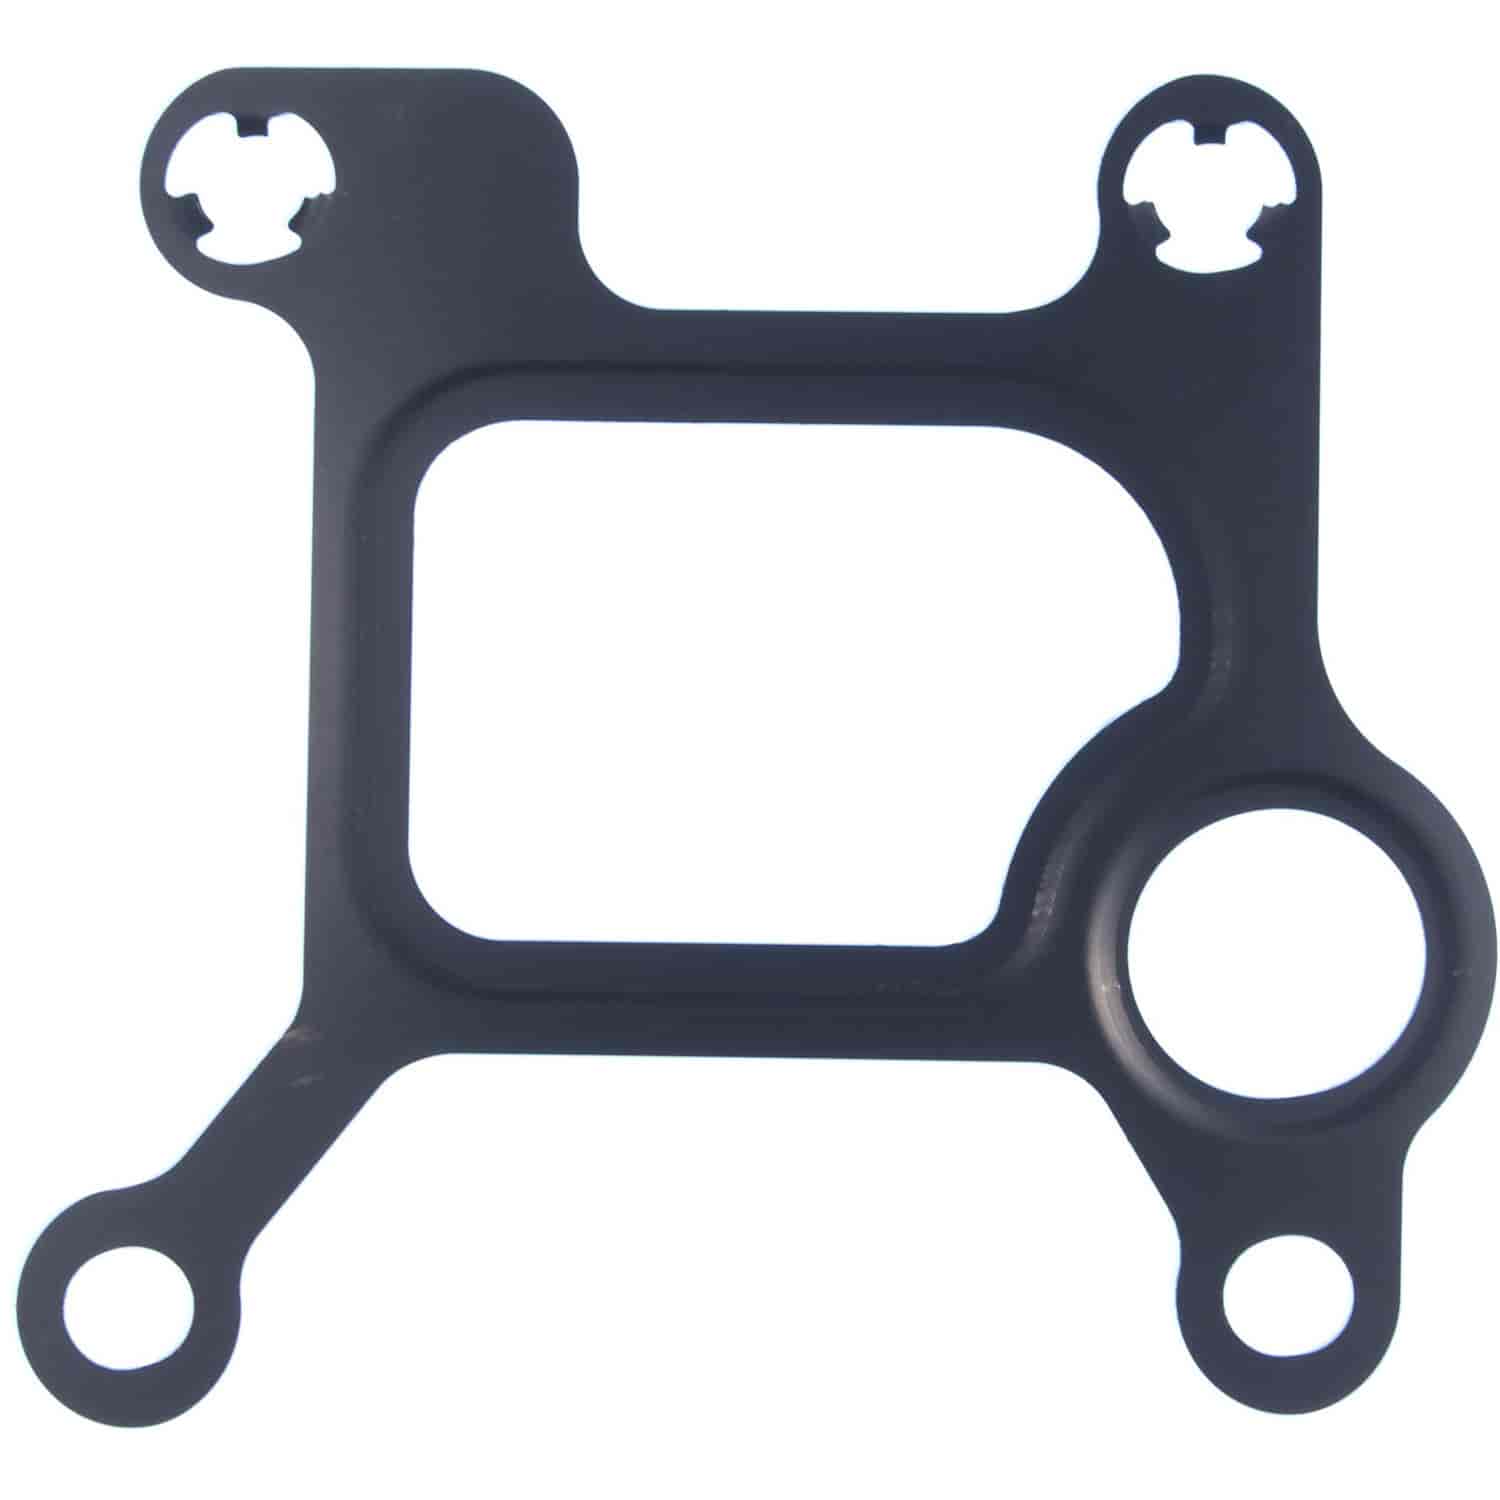 Water Outlet Gasket Mazda 2.3L 2006-2010 MZR Turbocharged Engines